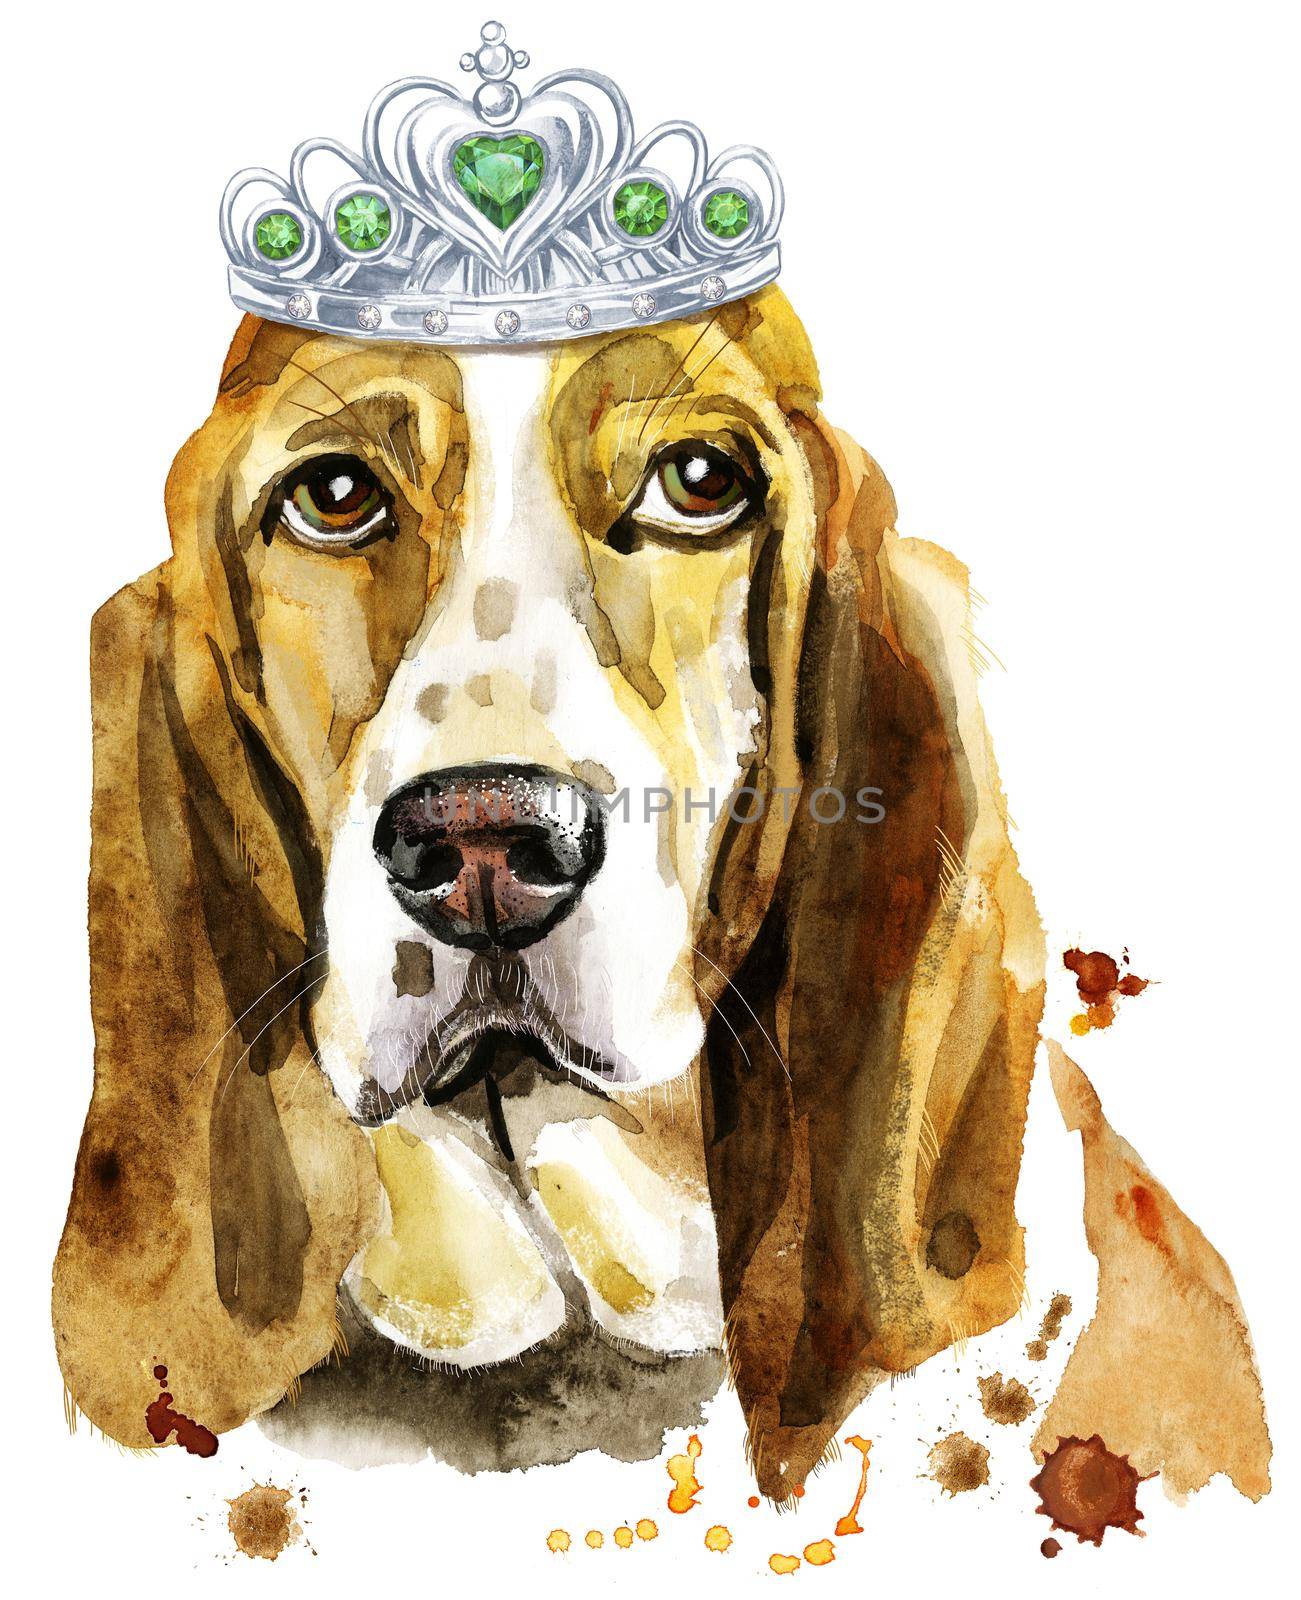 Cute Dog. Dog t-shirt graphics. Watercolor basset hound with silver crown